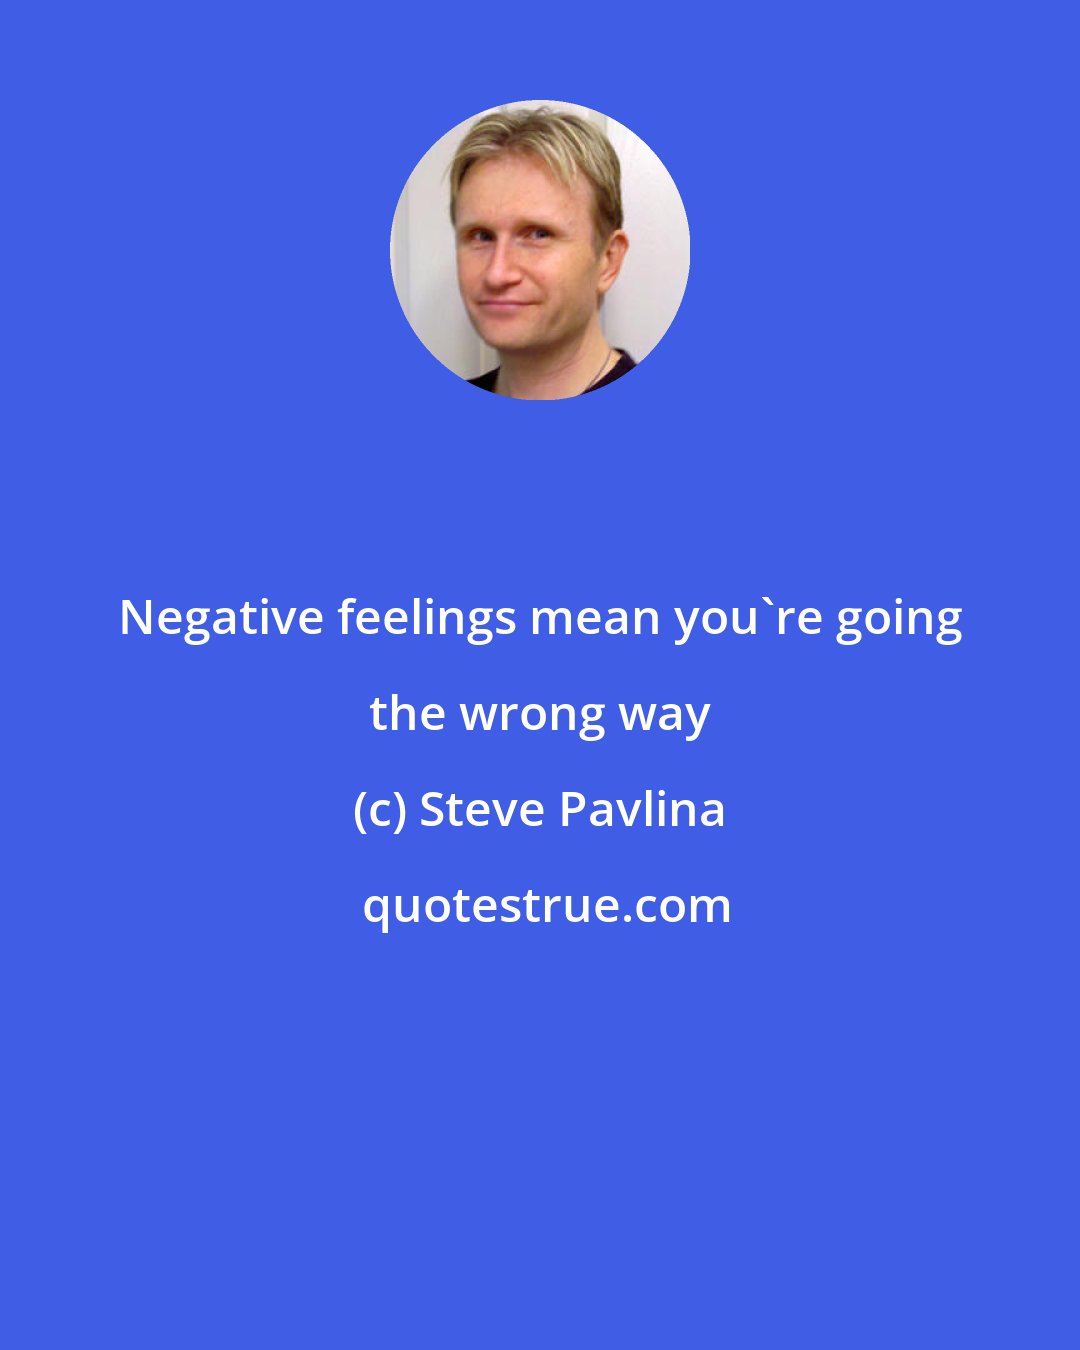 Steve Pavlina: Negative feelings mean you`re going the wrong way